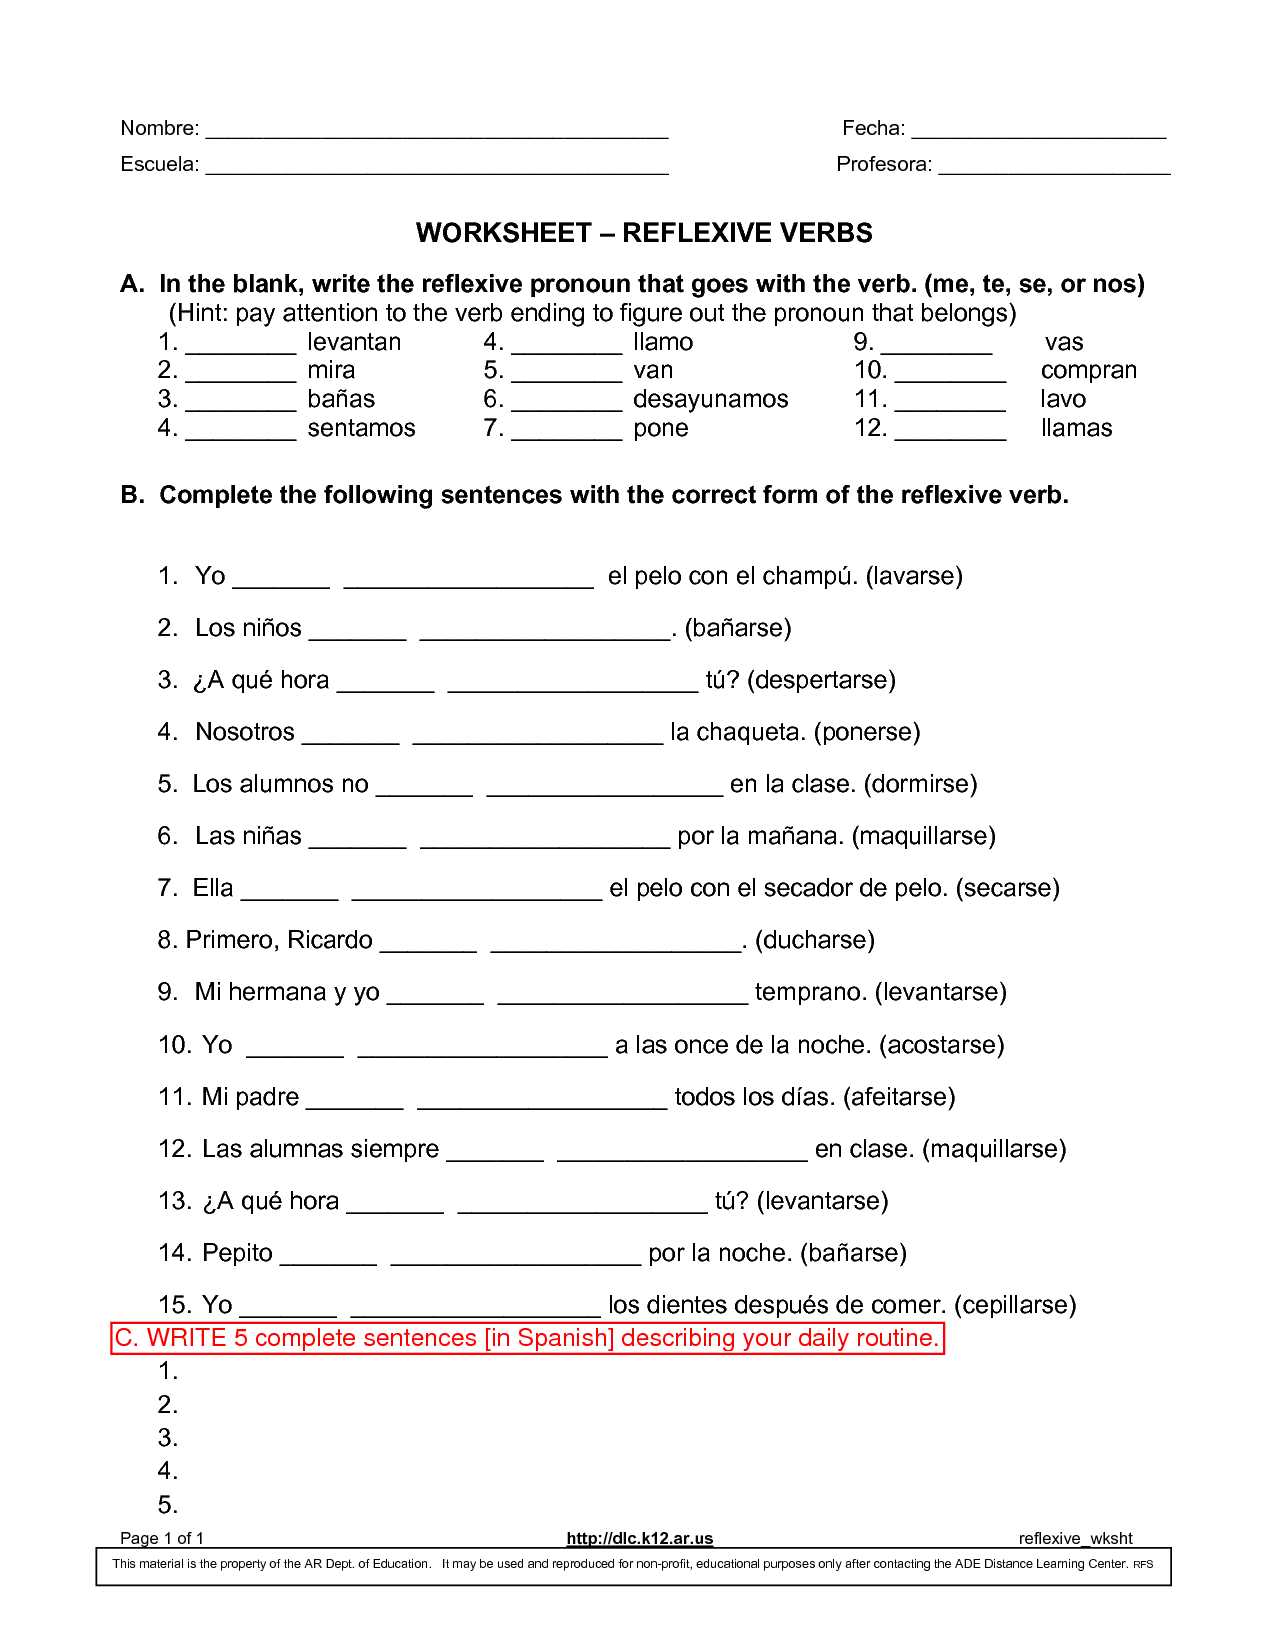 Spanish Reflexive Verbs Worksheet Pdf or Exercises Reflexive Verbs In French